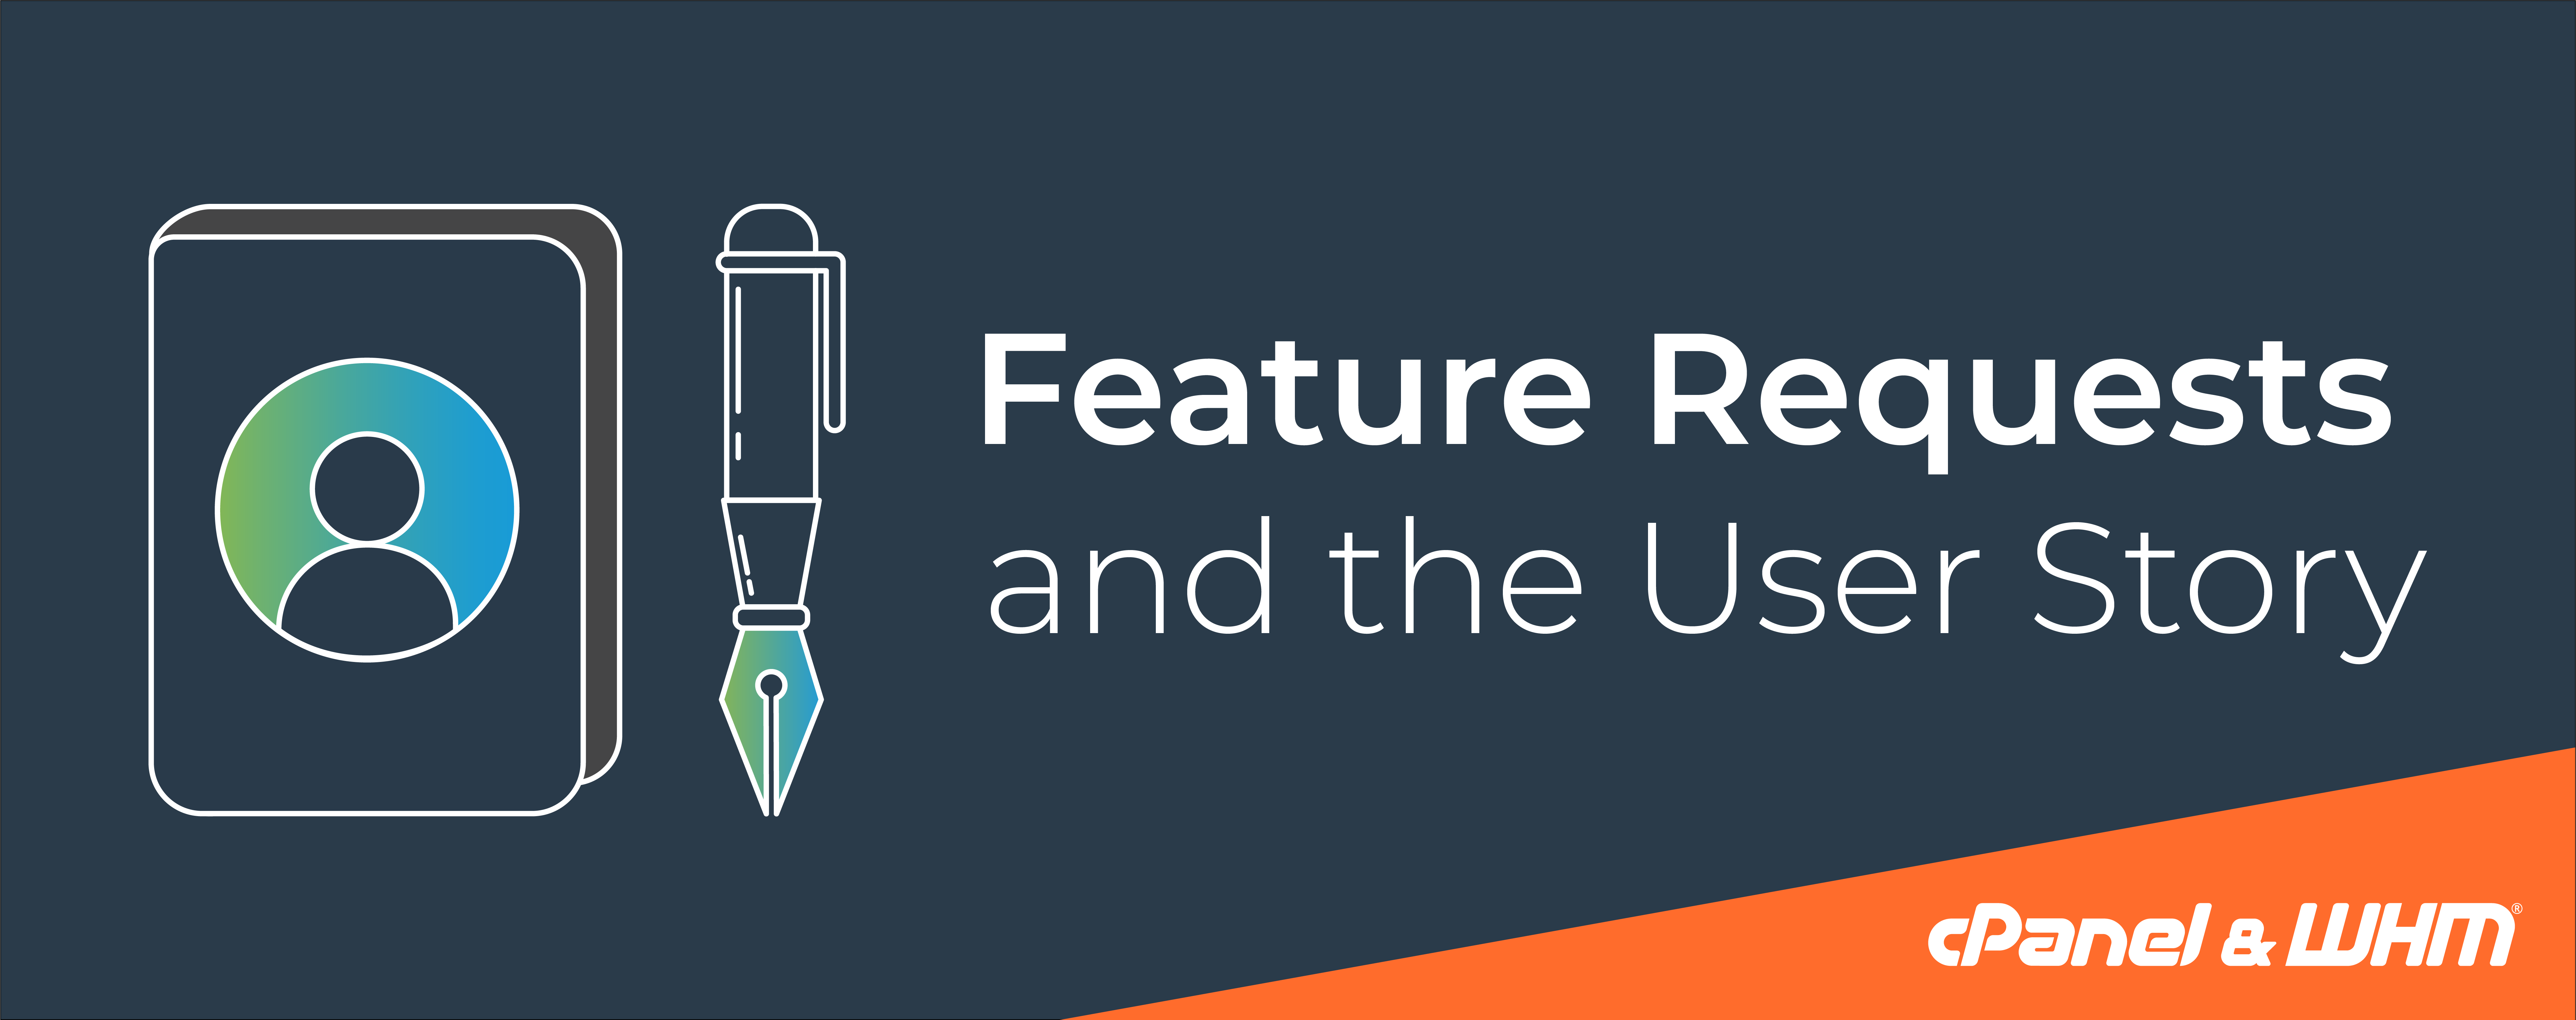 Feature Requests and the User Story